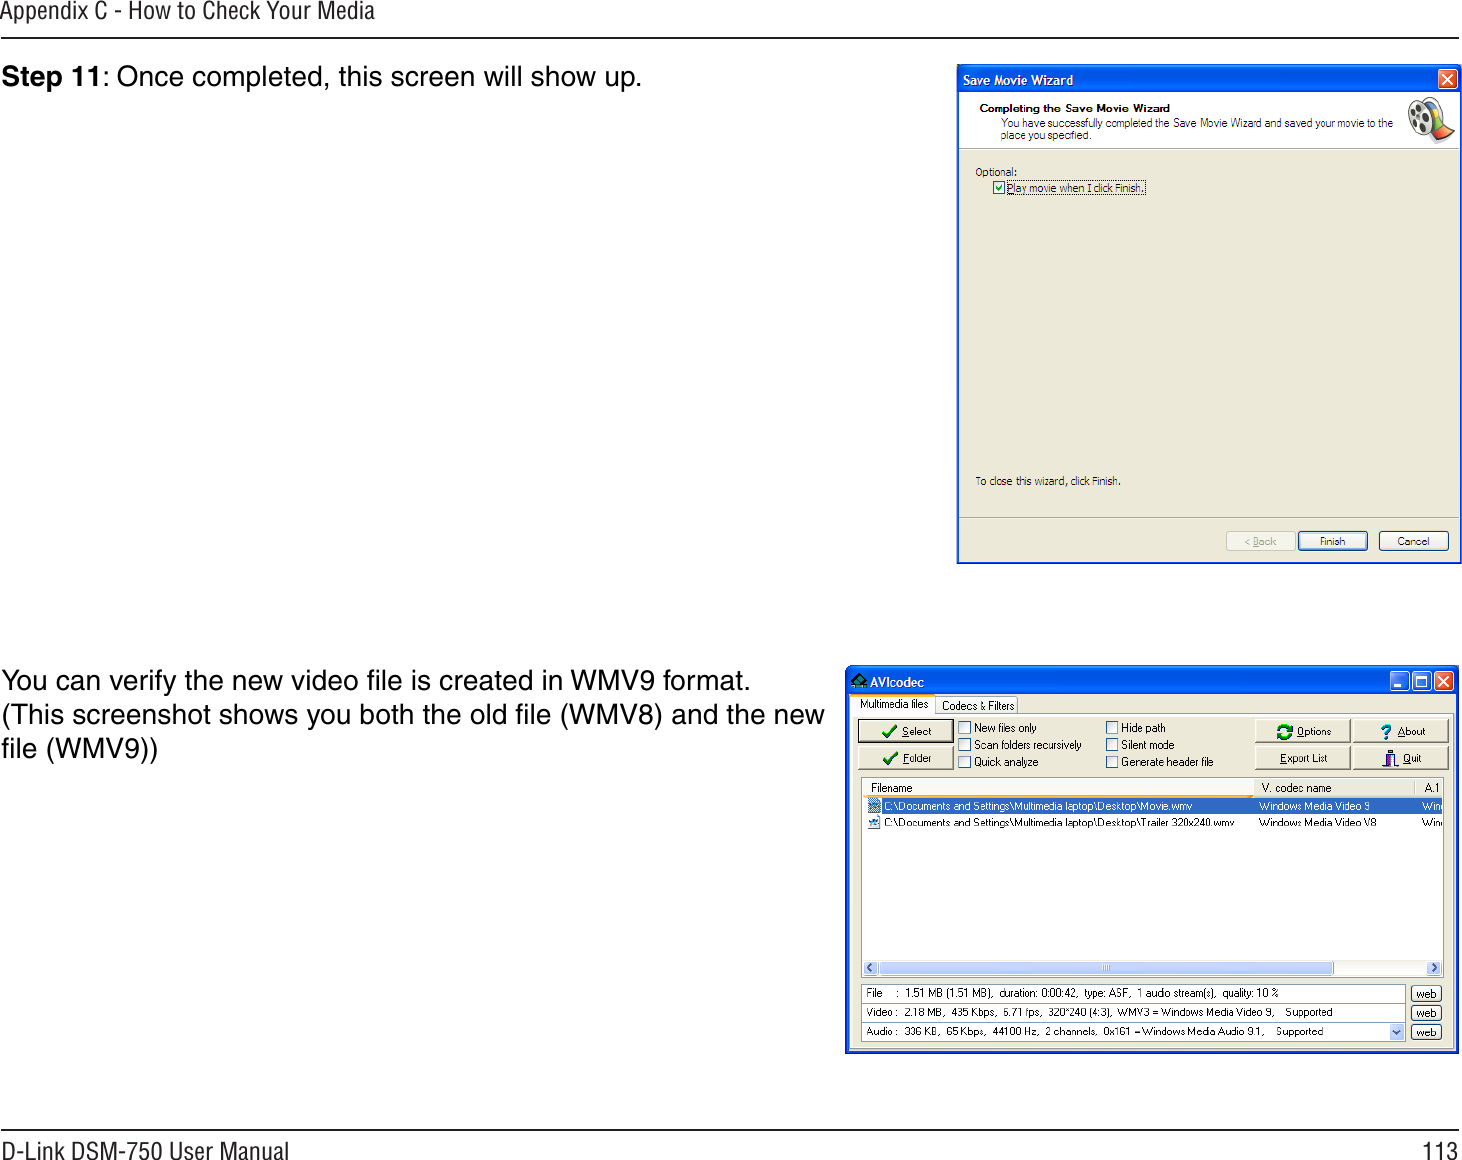 113D-Link DSM-750 User ManualAppendix C - How to Check Your MediaStep 11: Once completed, this screen will show up.You can verify the new video ﬁle is created in WMV9 format. (This screenshot shows you both the old ﬁle (WMV8) and the new ﬁle (WMV9))